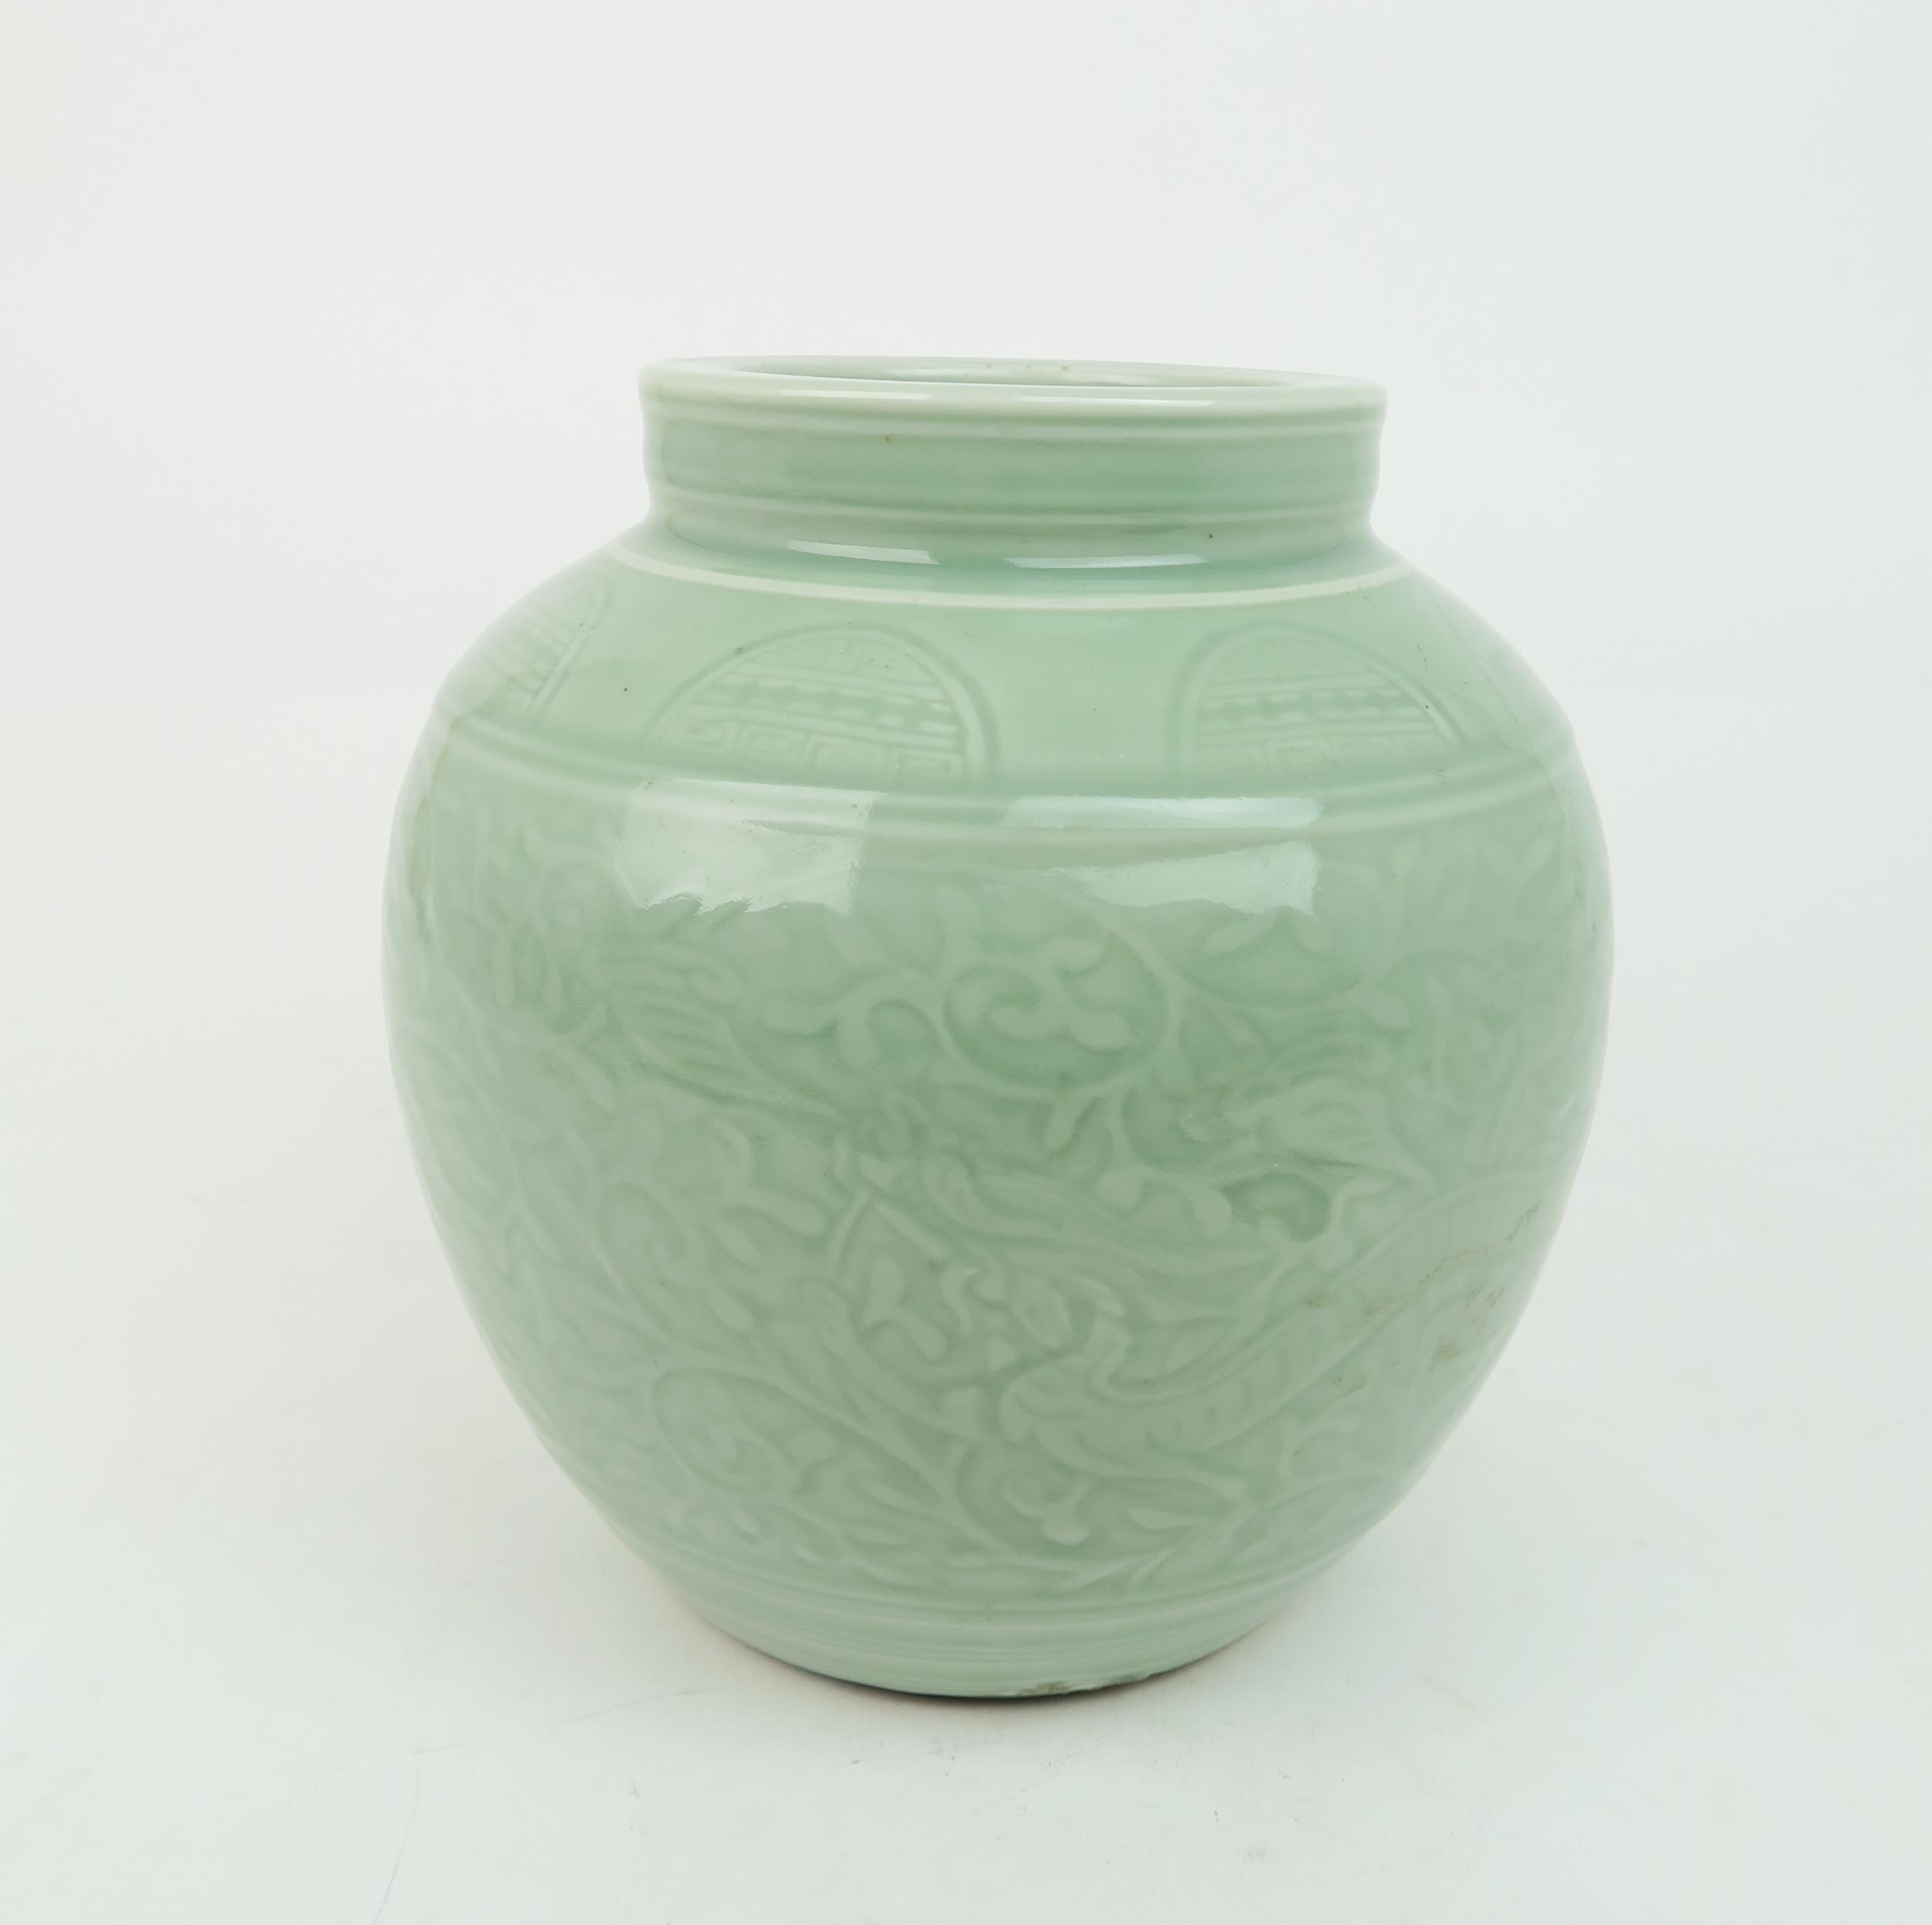 A CHINESE CELADON VASE  Carved with an archaic band above scrolling foliage, and horizontal banding, - Image 2 of 12